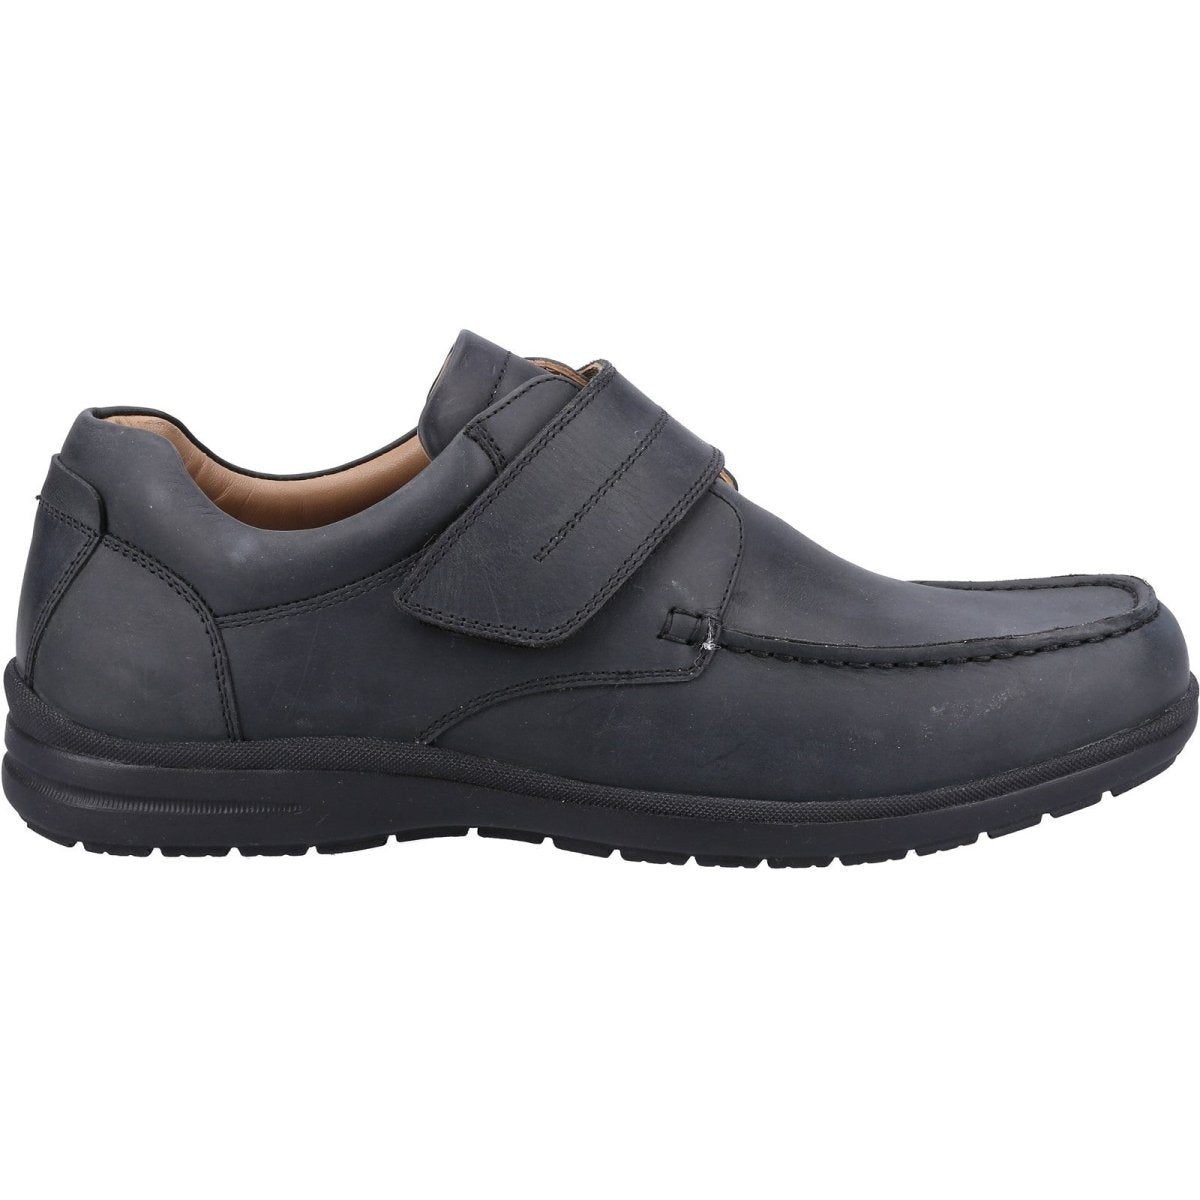 Fleet & Foster David Mens Leather Touch-Fastening Moccasin Shoes - Shoe Store Direct